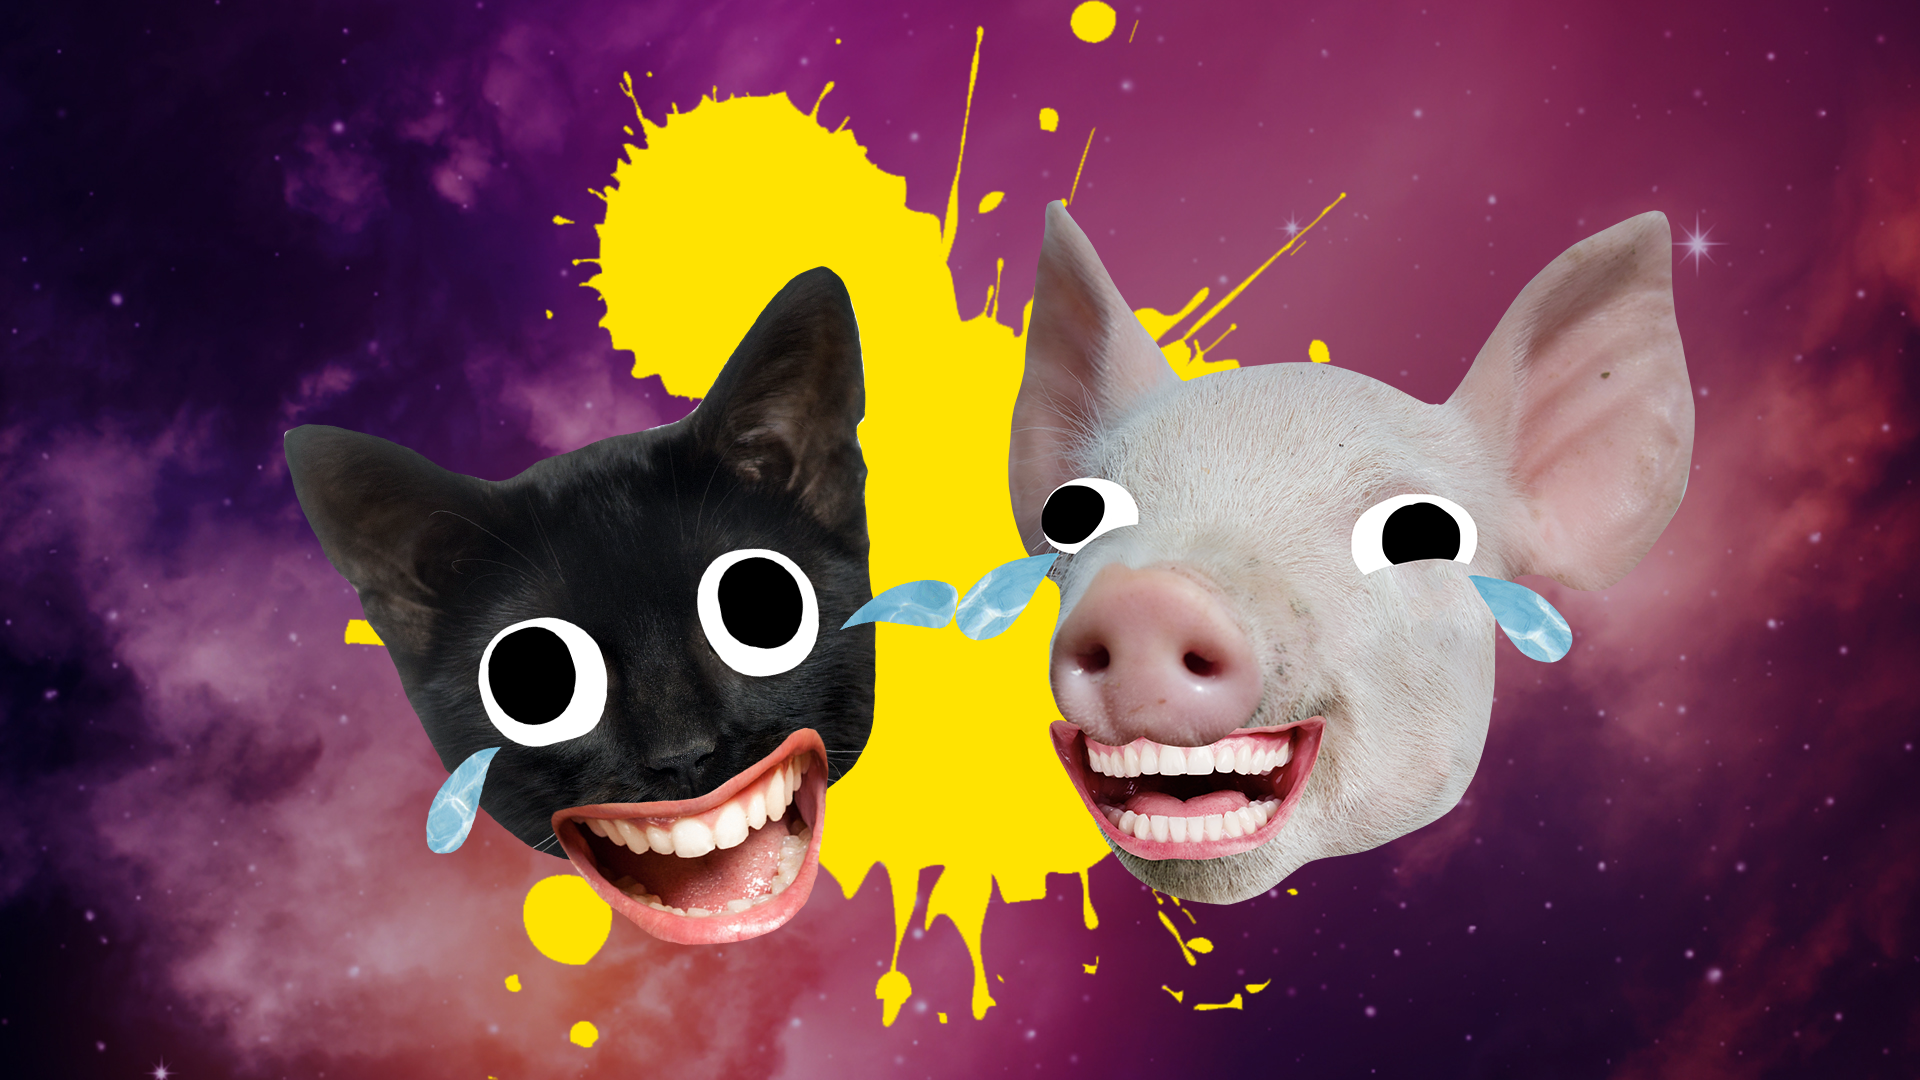 Cry laughing pig and cat